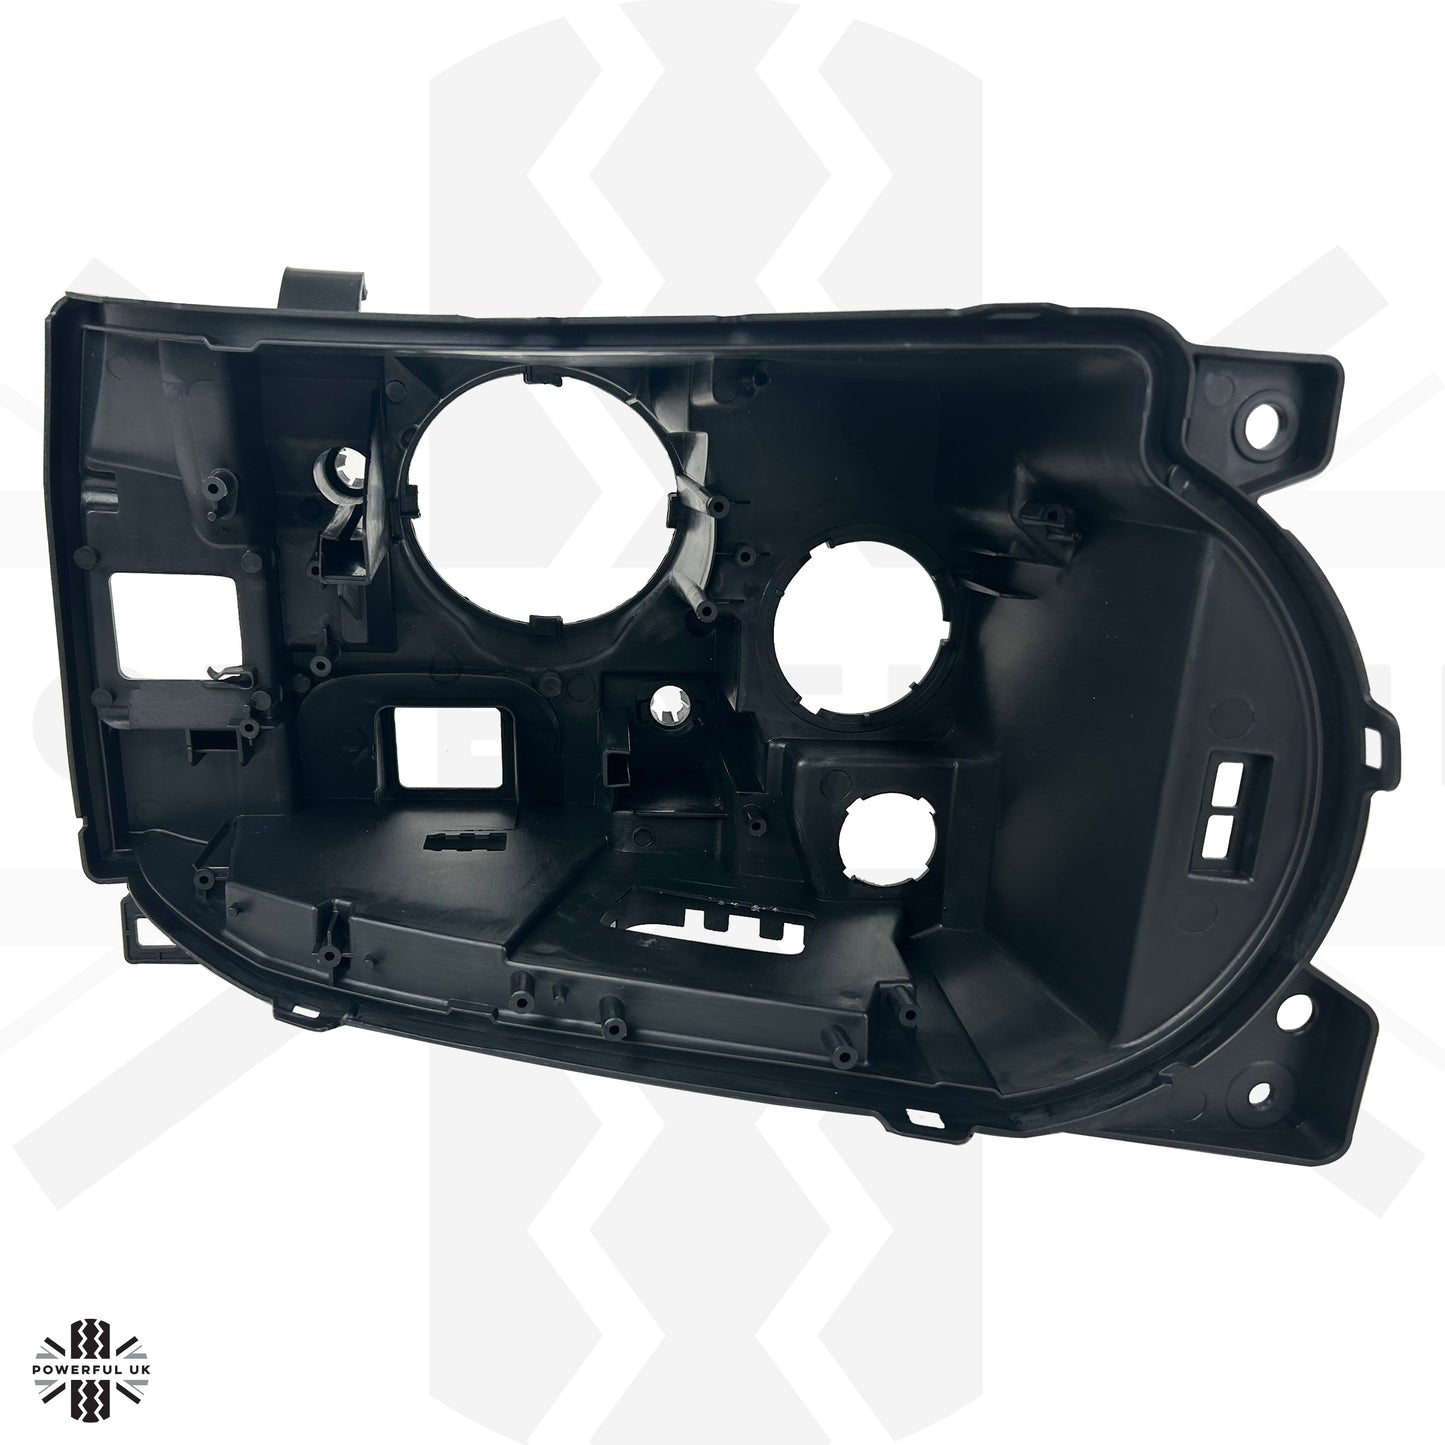 Replacement Headlight Rear Housing for Range Rover L322 2010 - RH